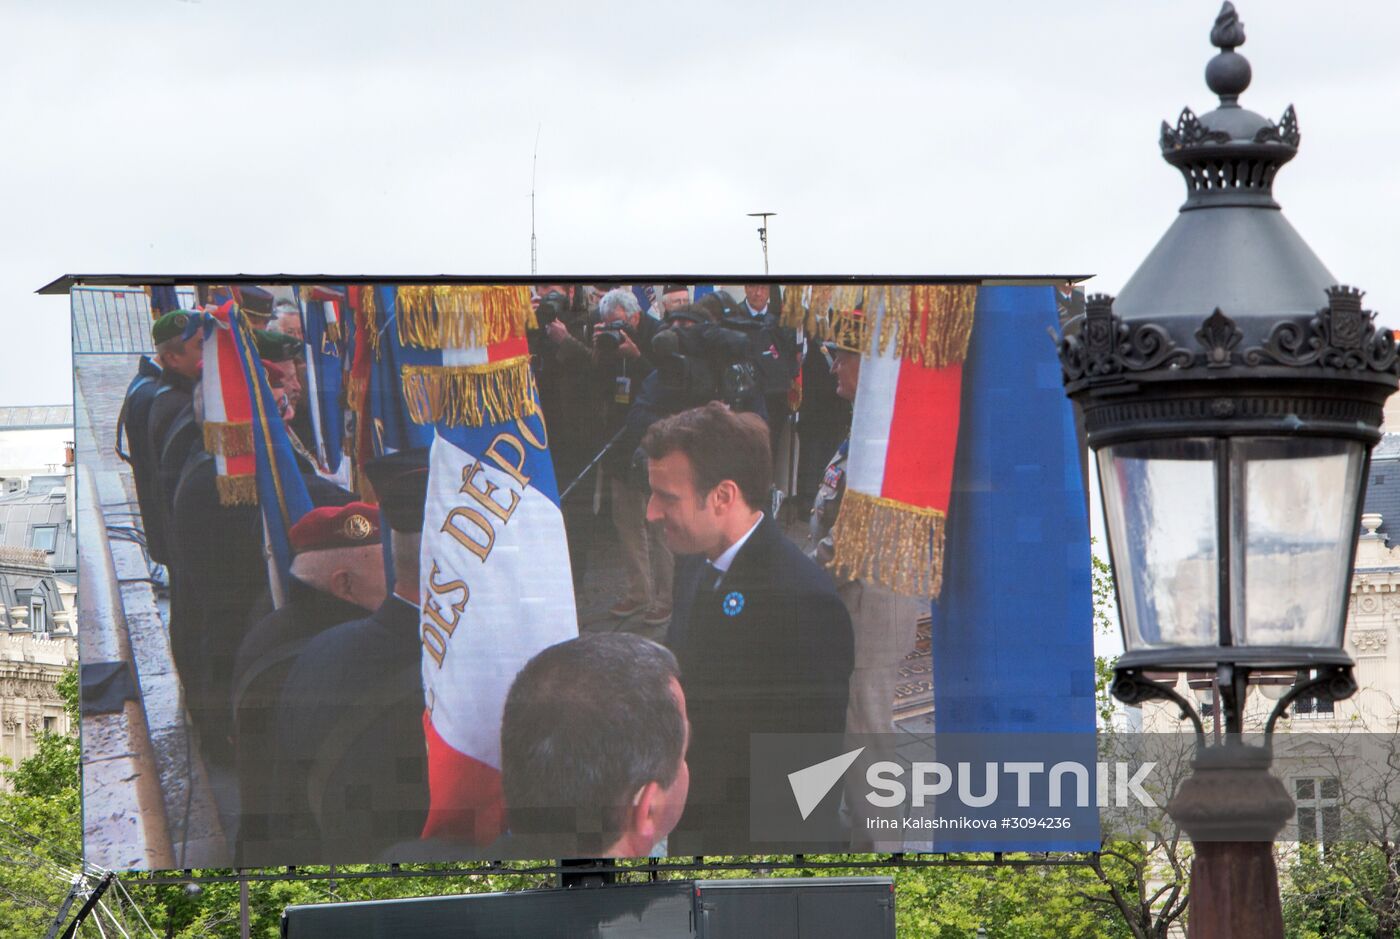 French President Francois Hollande and President-elect Emmanuel Macron at the ceremony marking 72nd anniversary of victory over Nazi Germany